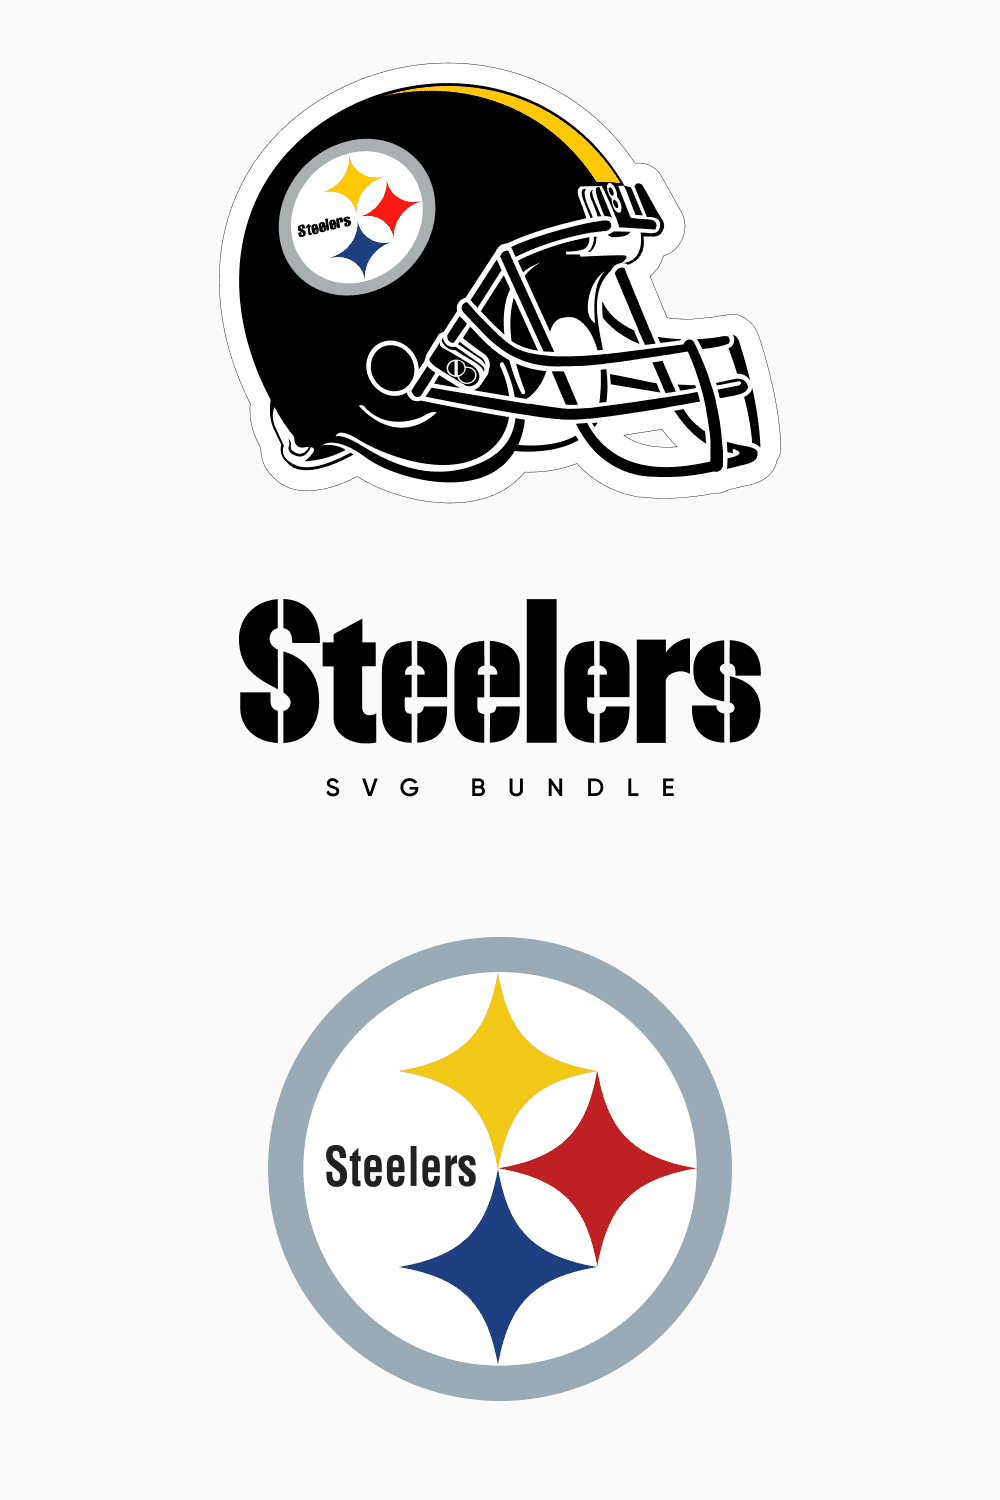 steelers svg collection pinterest image.